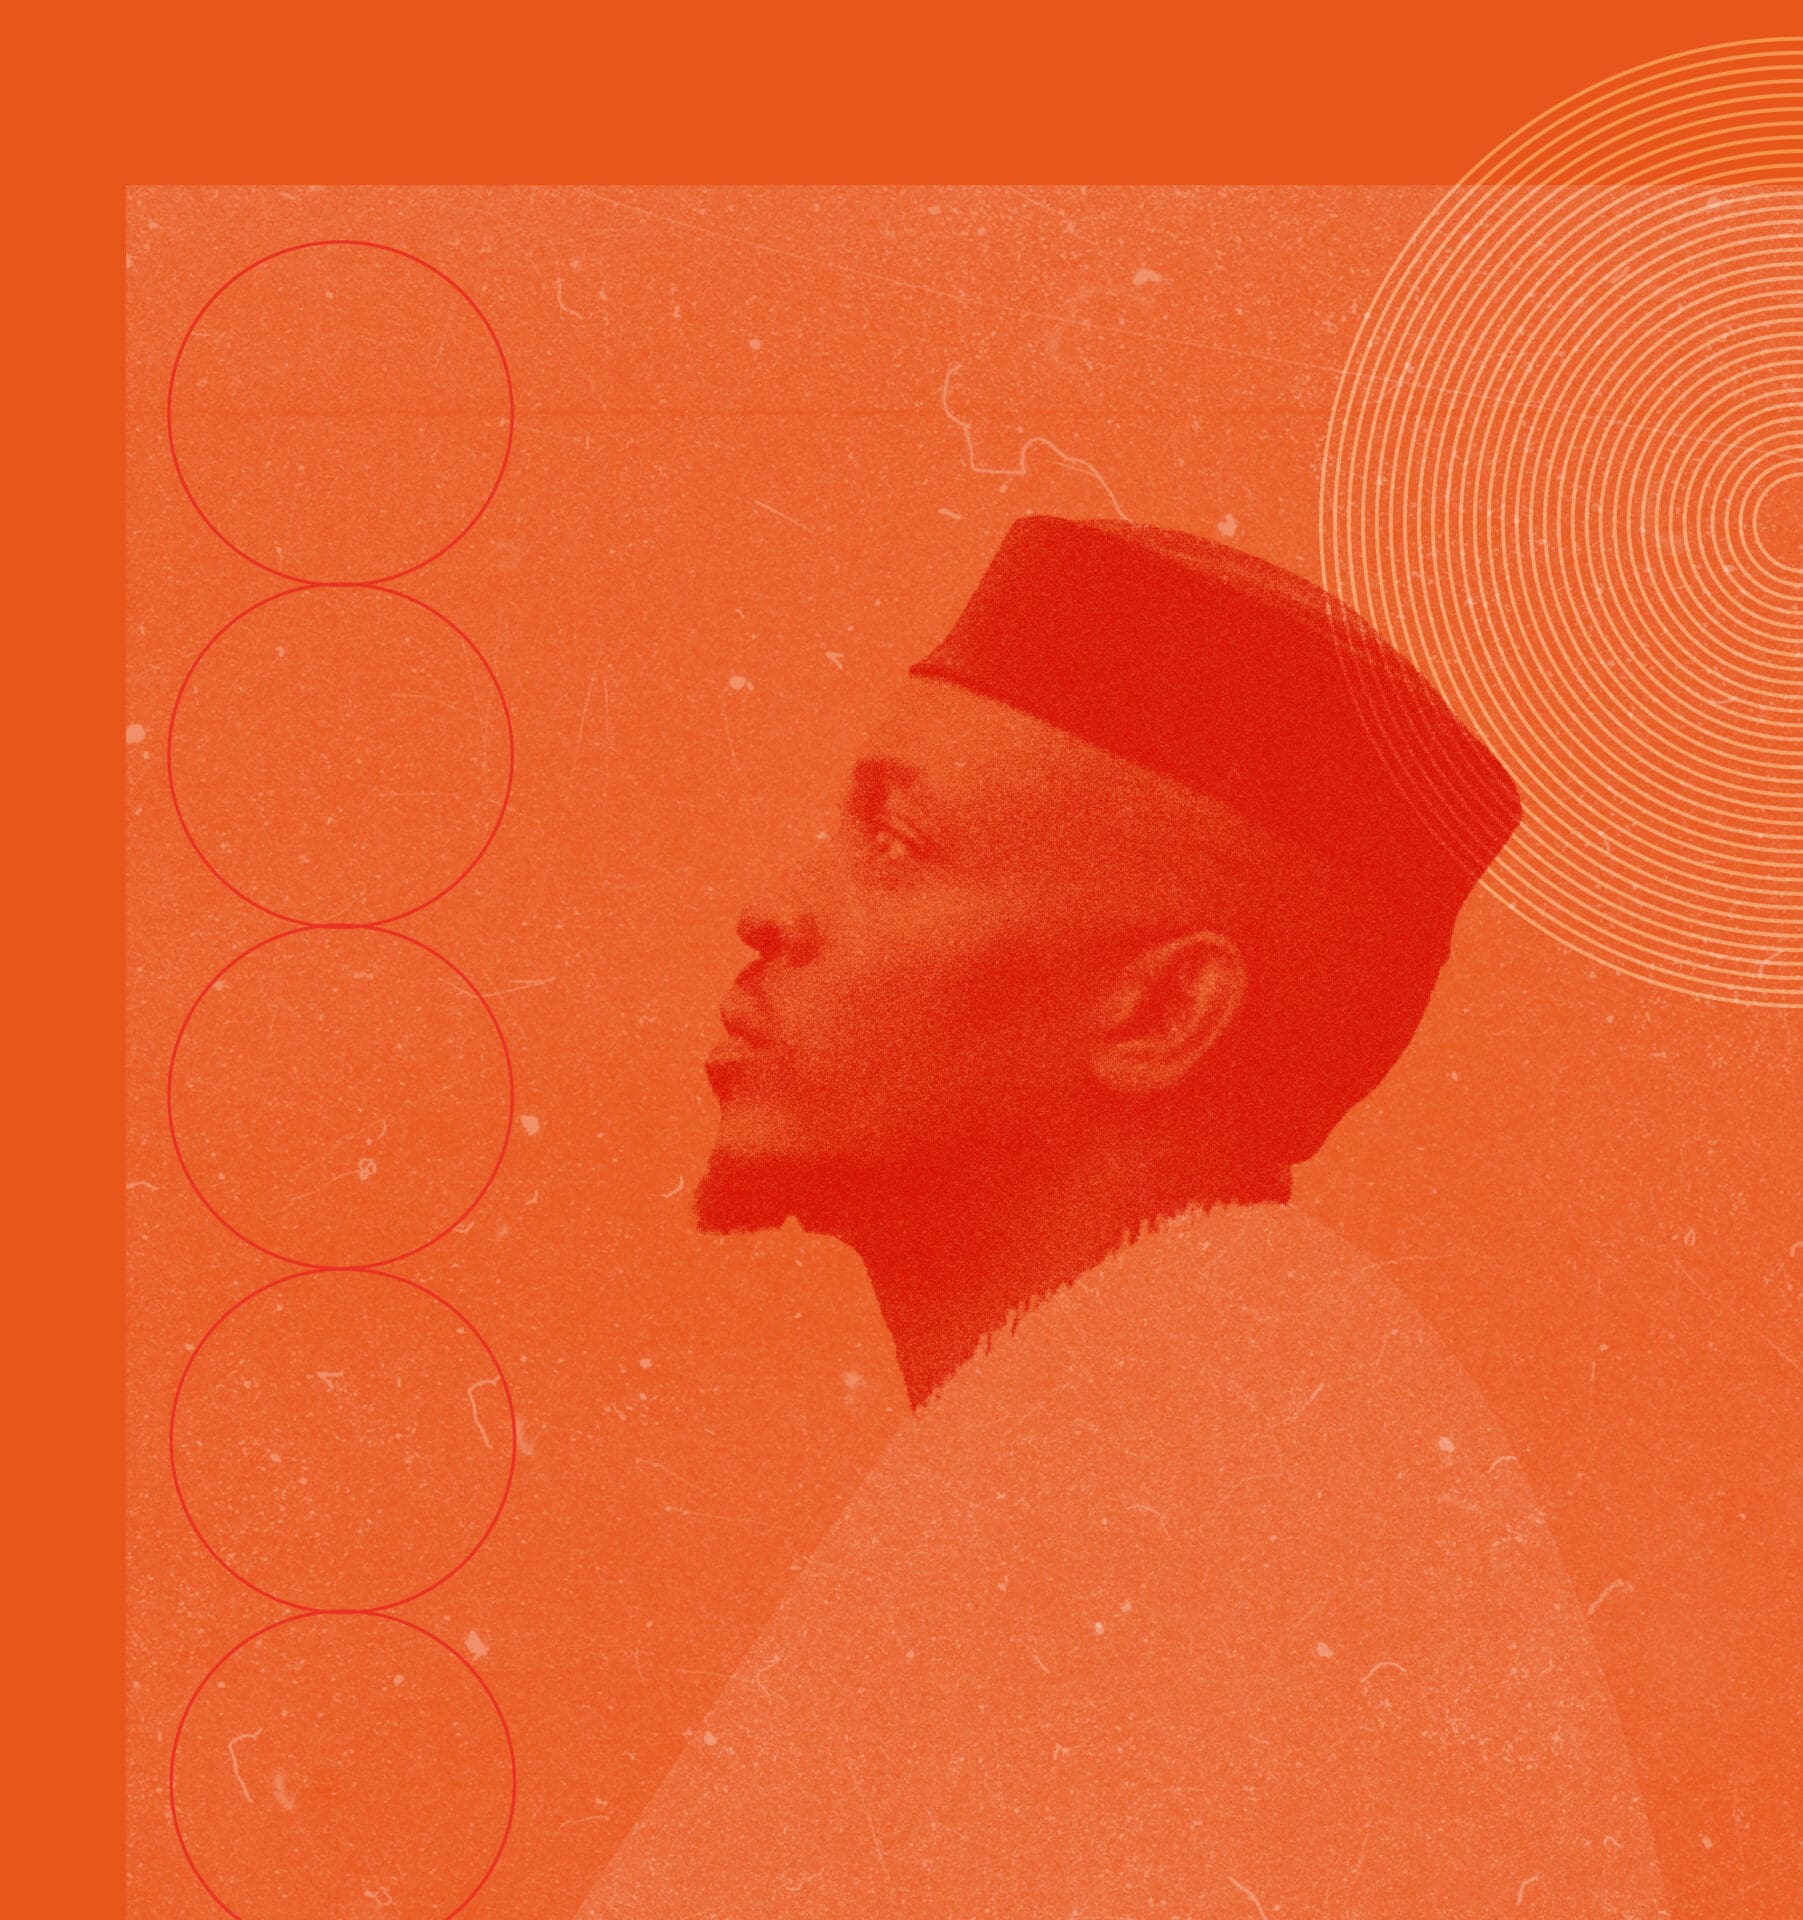 A red and orange graphic collage featuring Nigerian rapper M.I Abaga